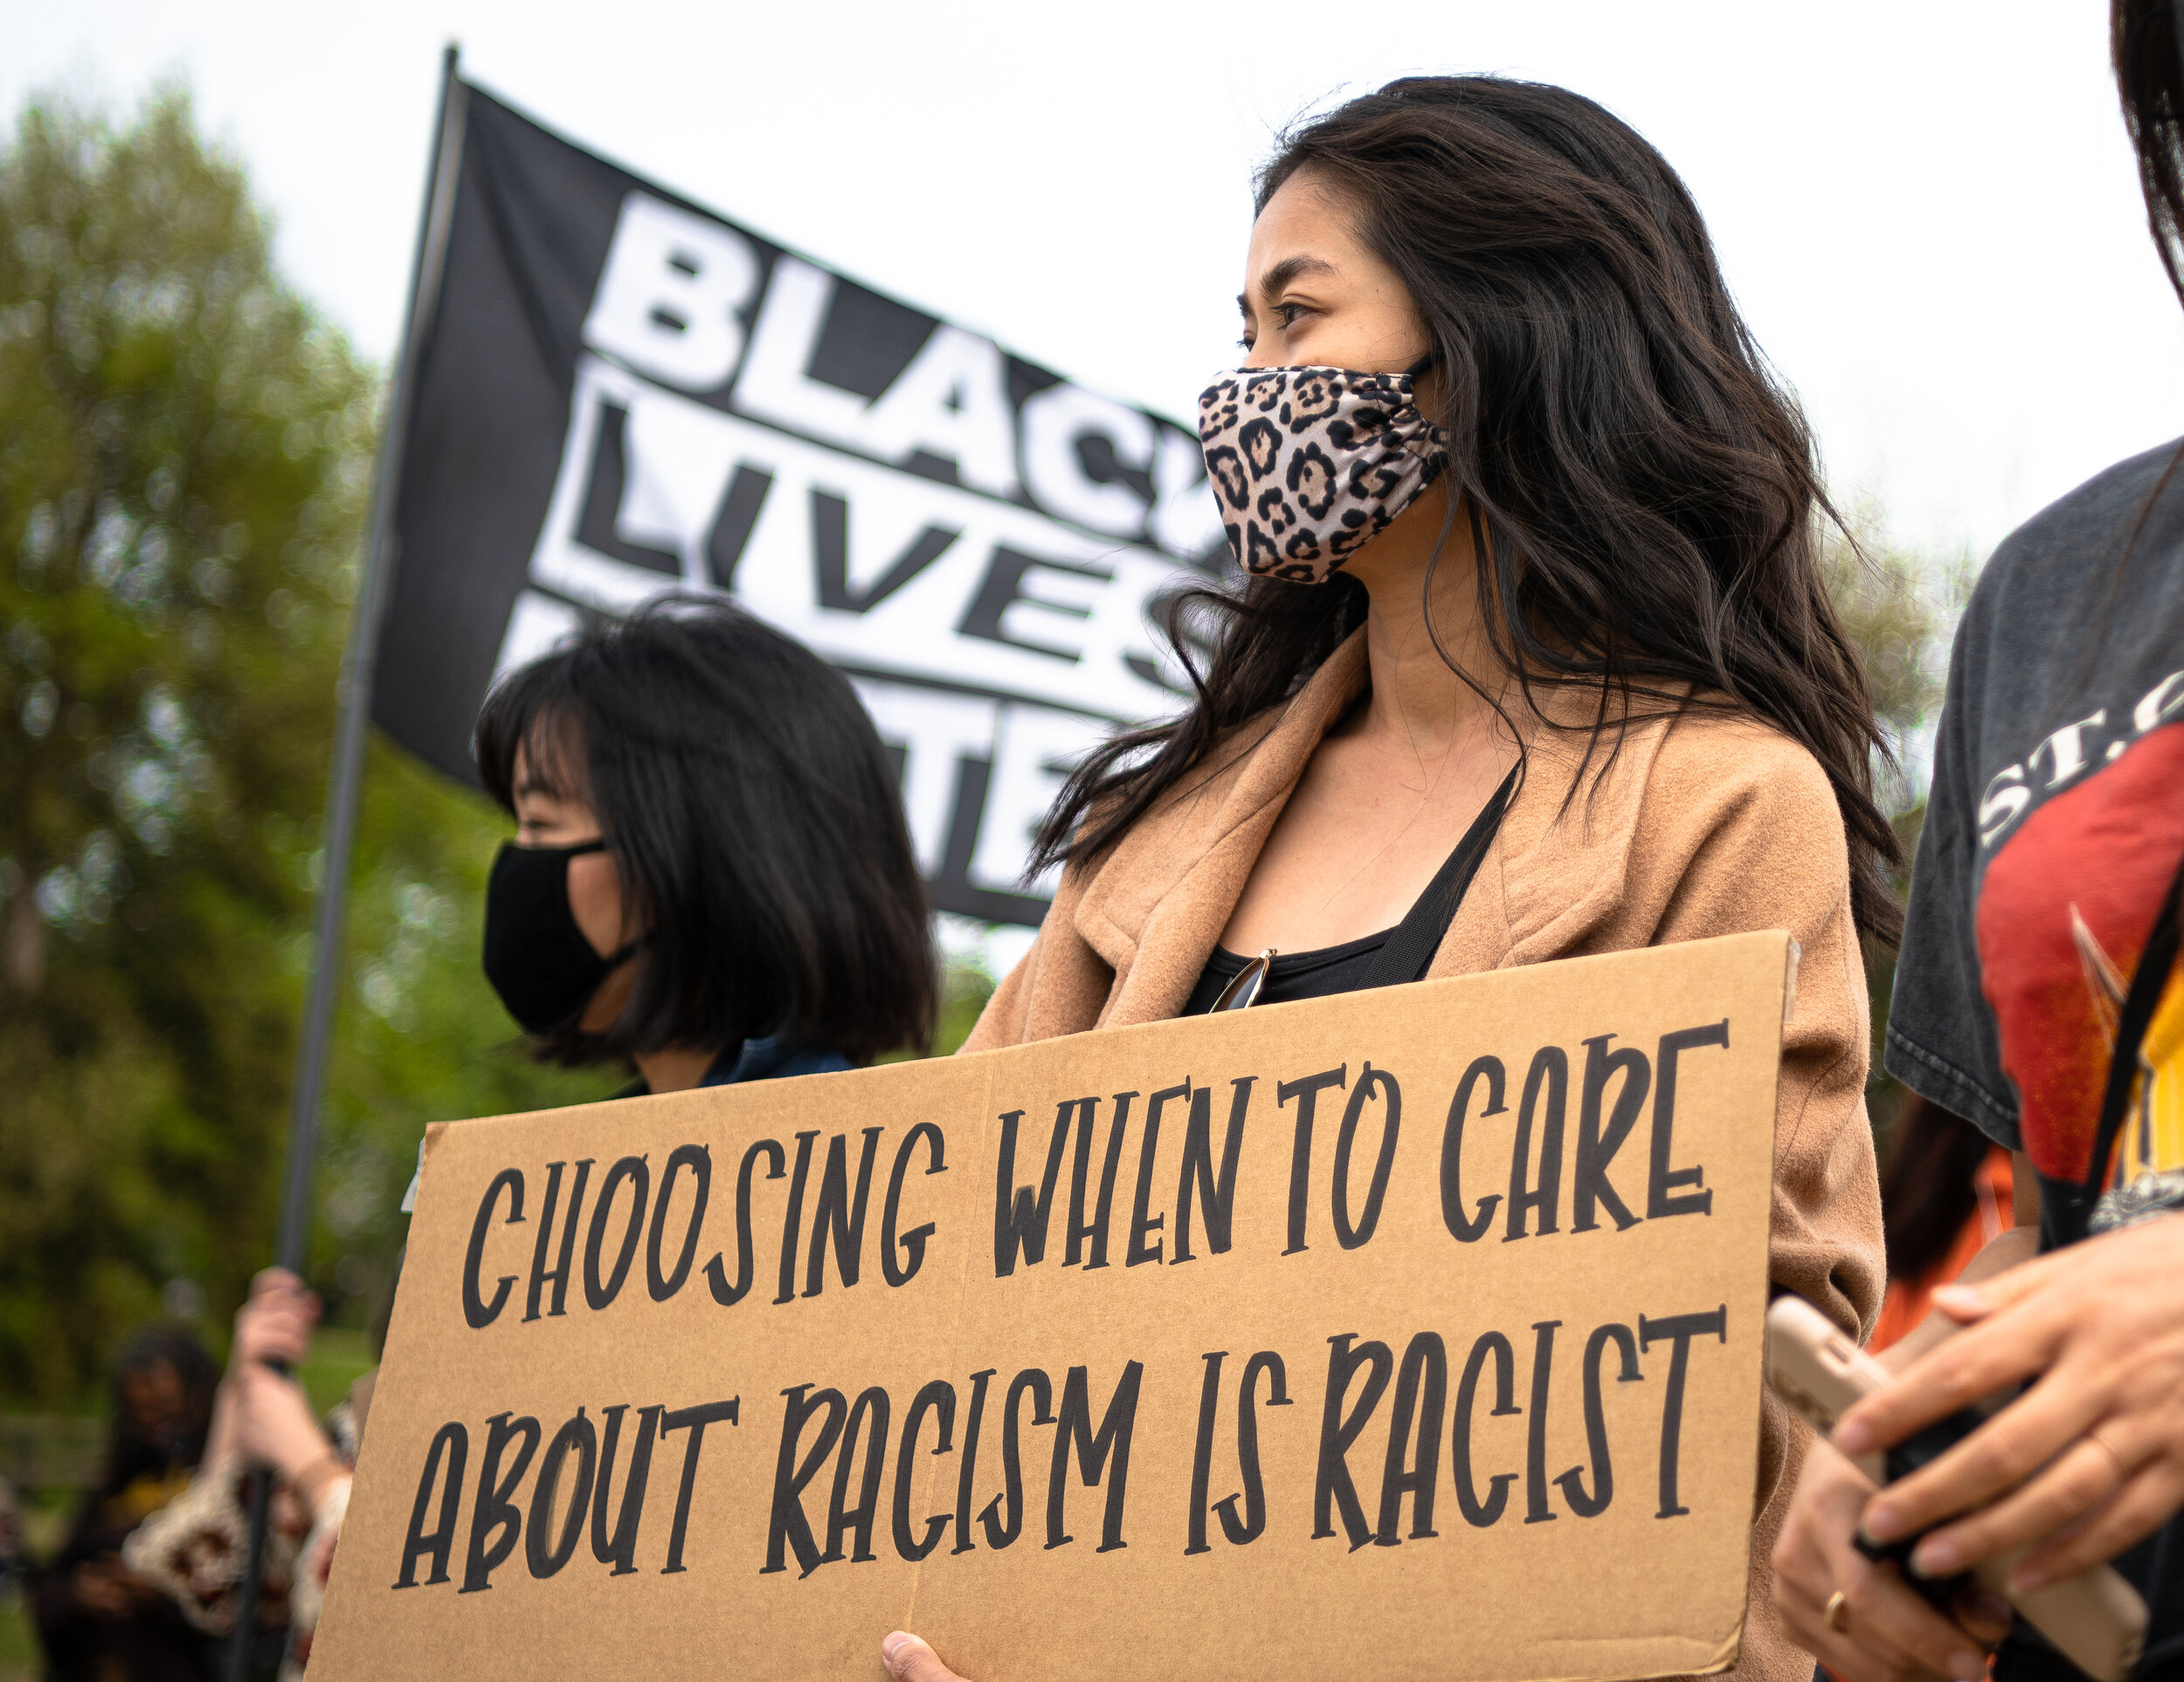  A Black Lives Matter supporter proudly displays her sign at the memorial event held for George Floyd on April 25, 2021 in Hollywood Calif. (Jon Putman / The Corsair) 